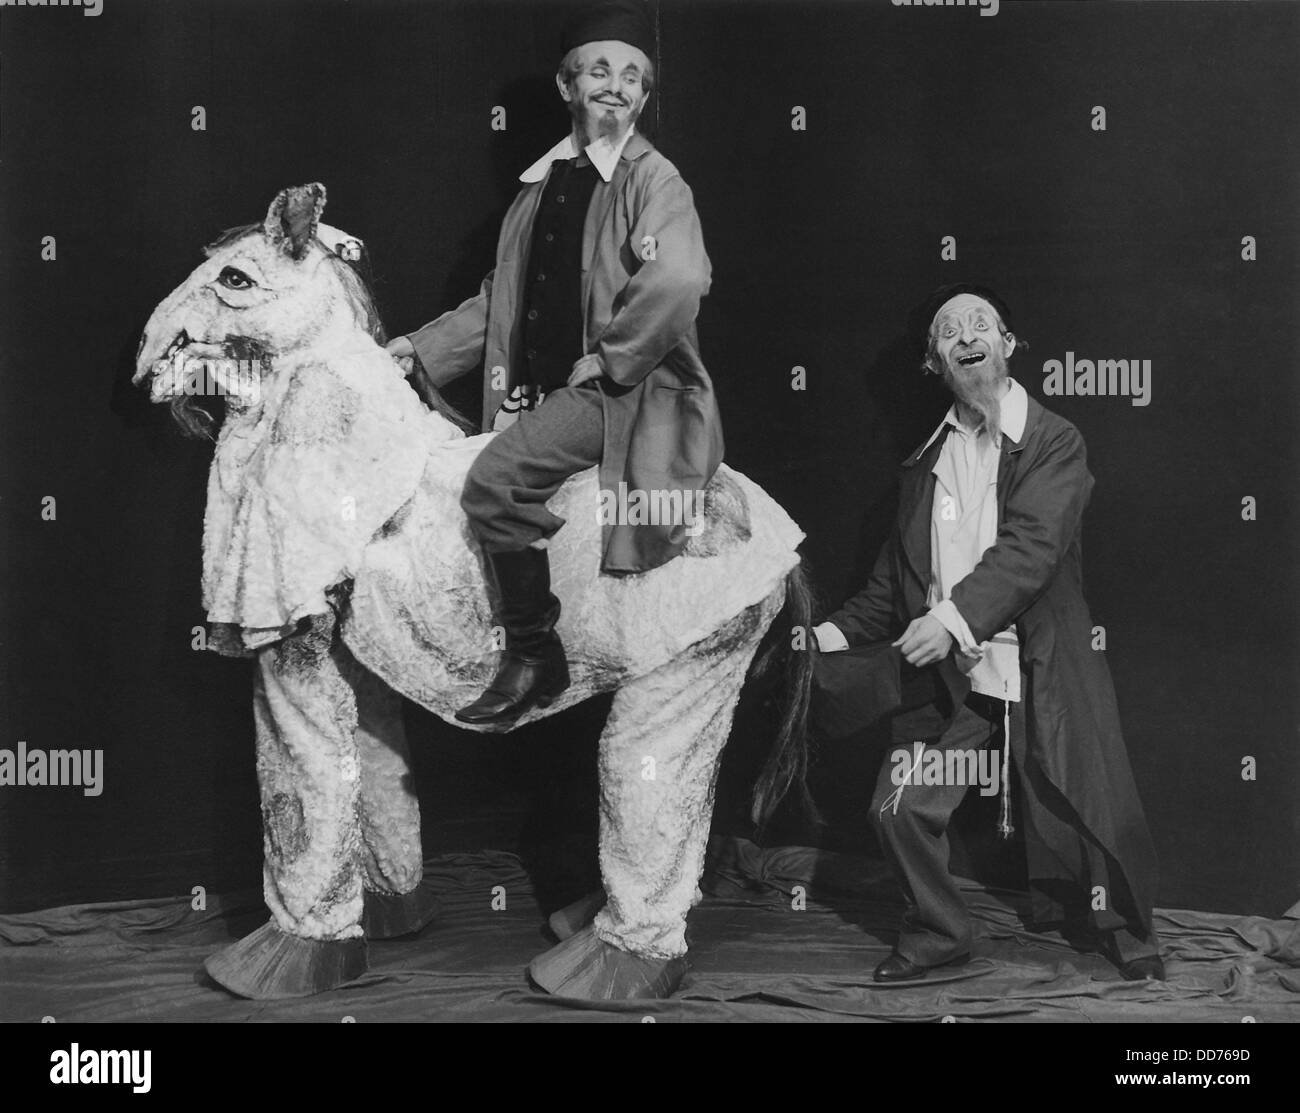 Scene from WPA Federal Theater Project, ca. 1936-39. Play from the Jewish Theater Unit. (BSLOC 2013 7 98) Stock Photo